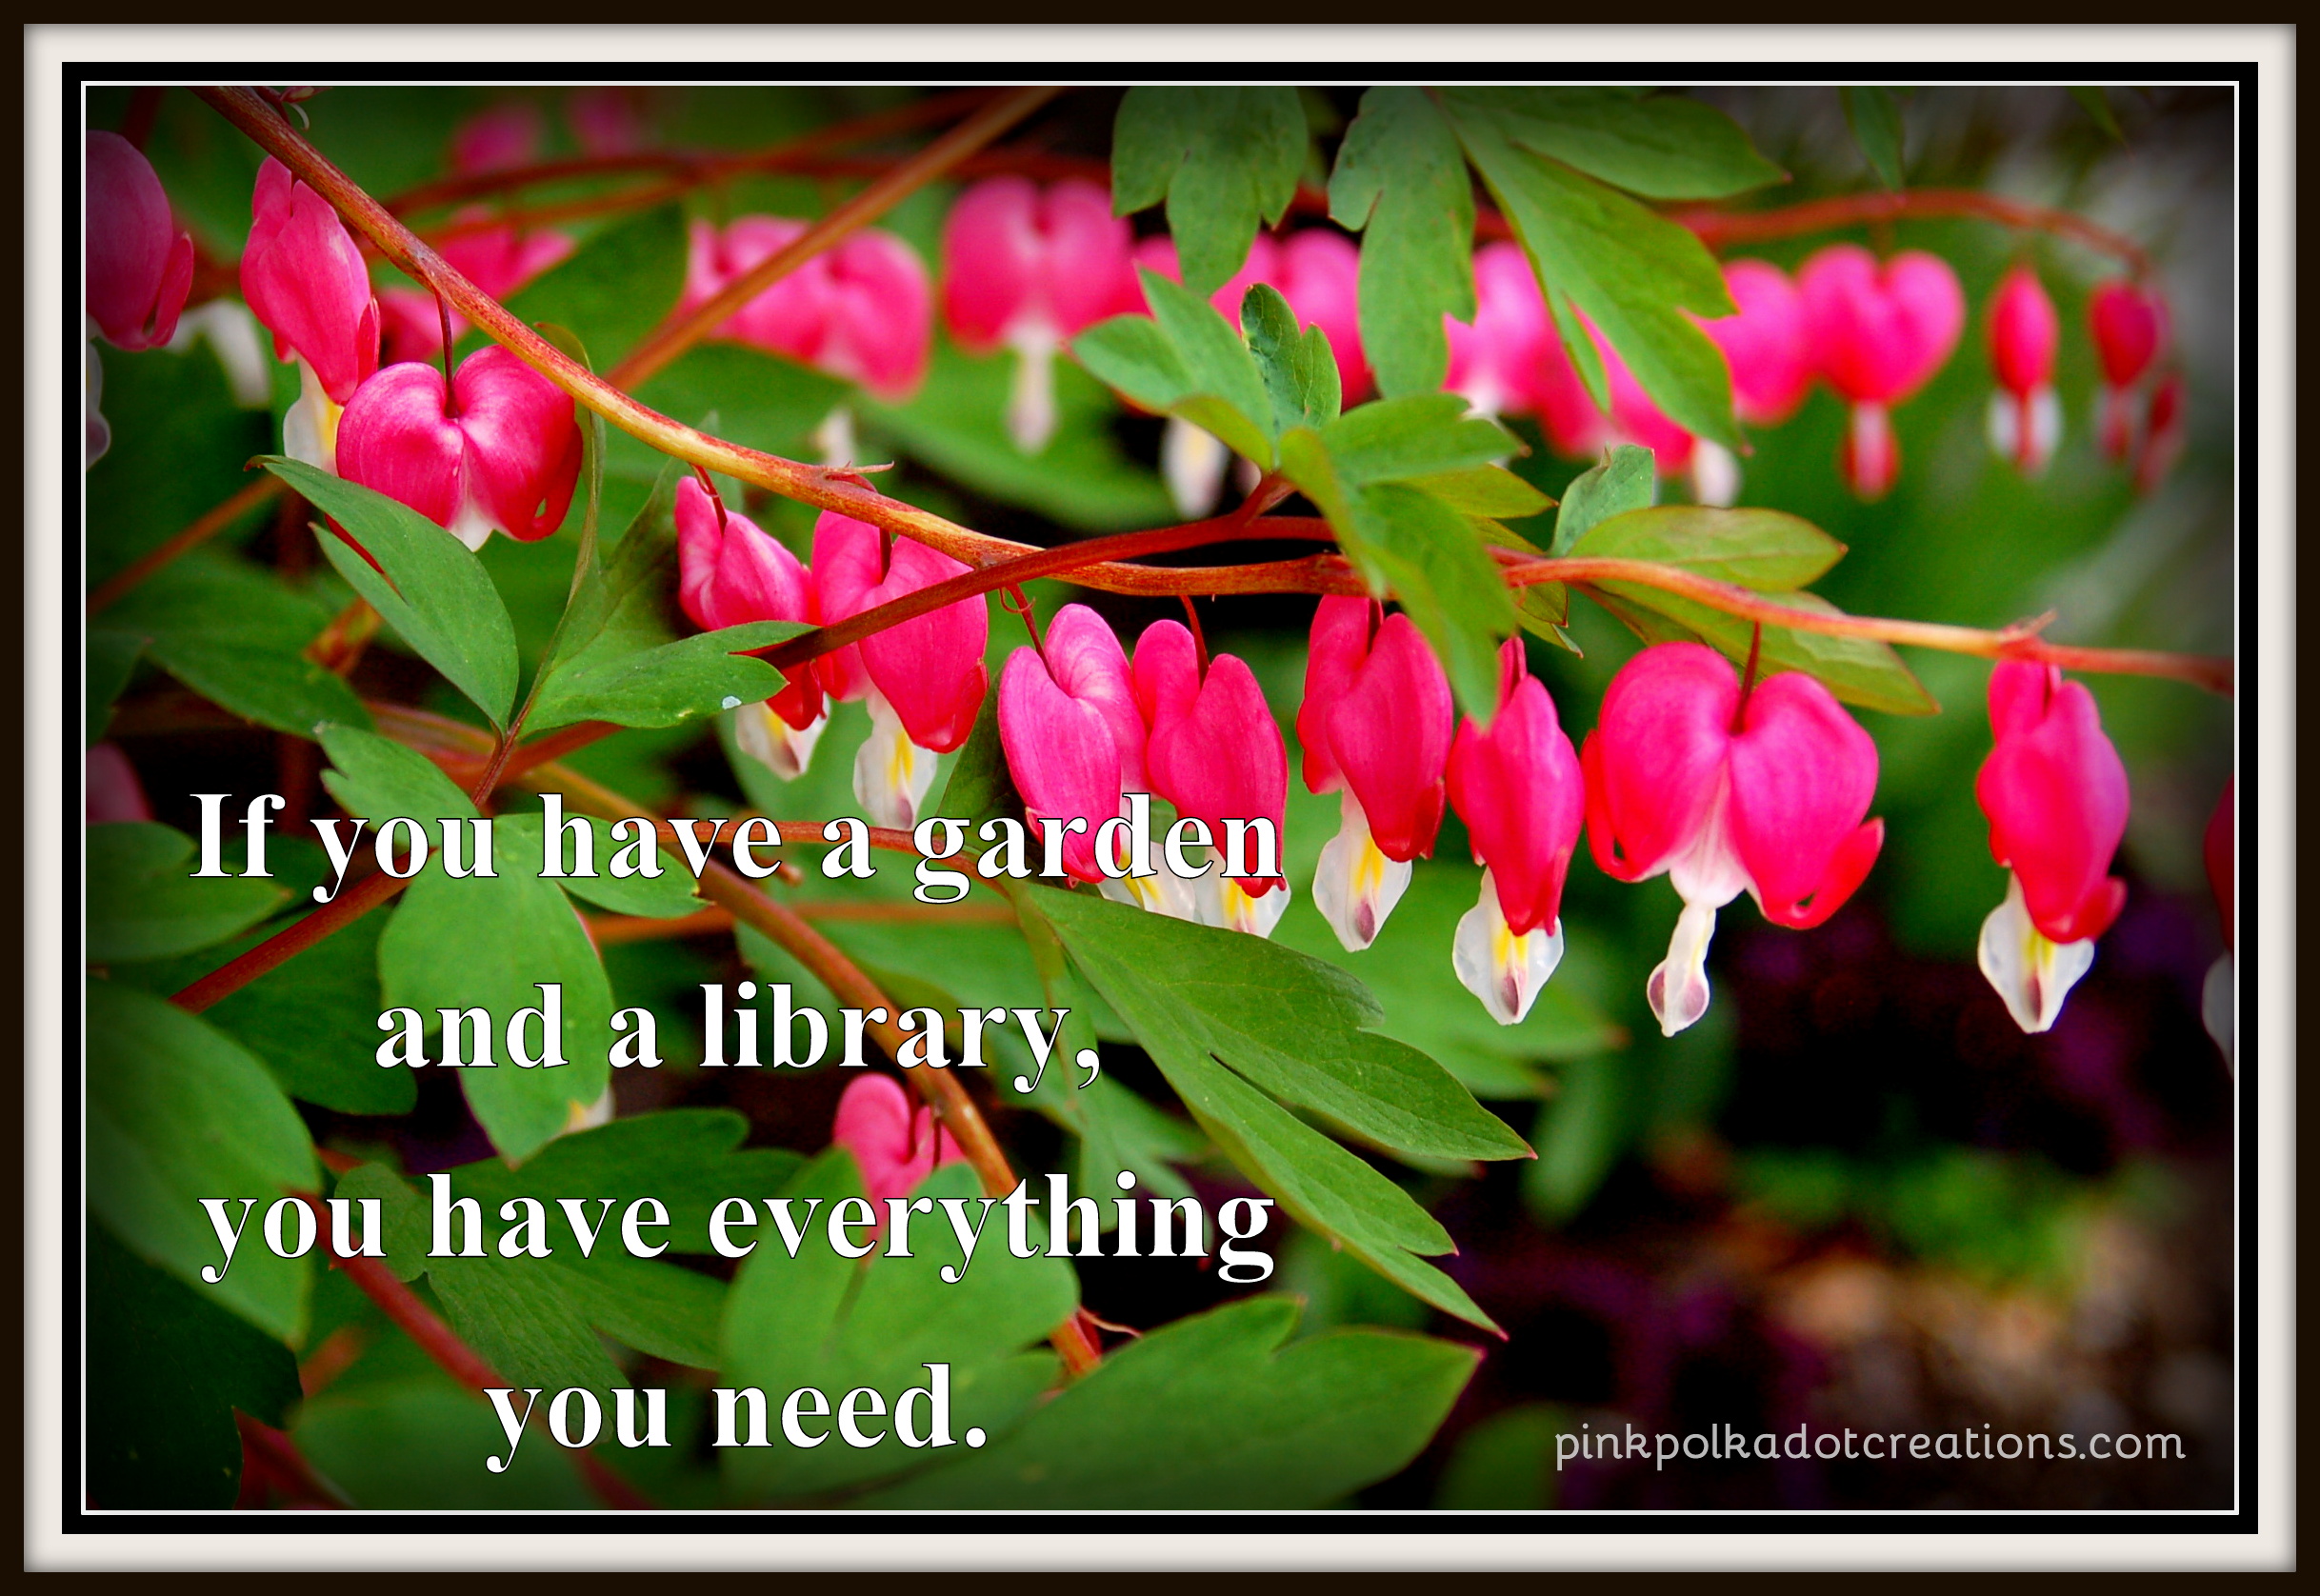 Thursday S Thought If You Have A Garden Pink Polka Dot Creations